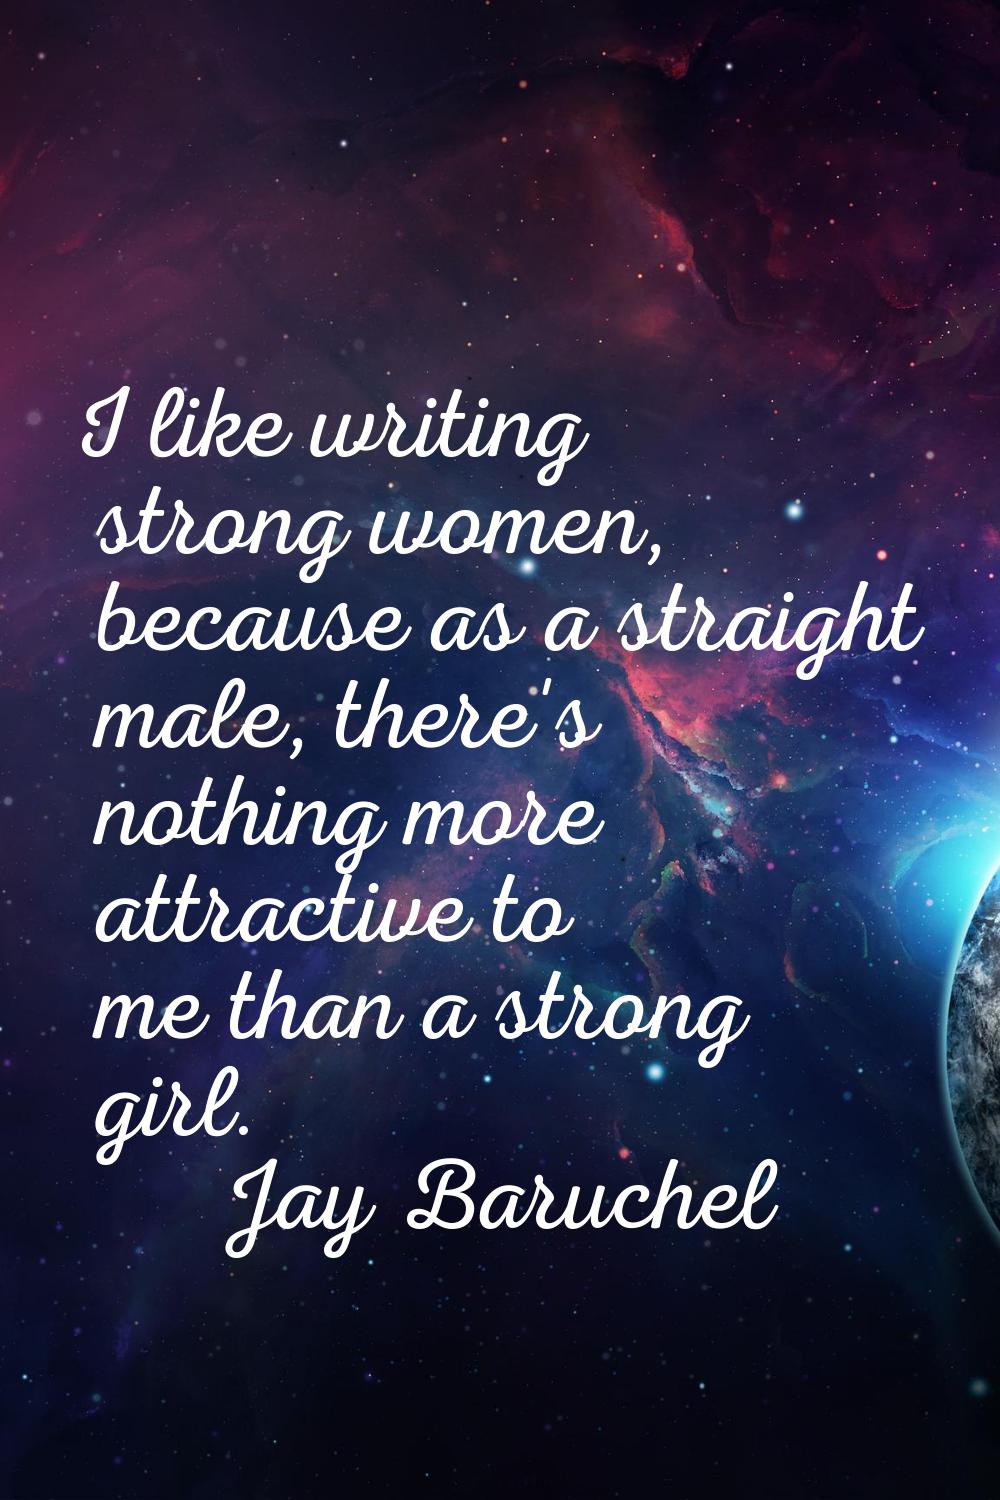 I like writing strong women, because as a straight male, there's nothing more attractive to me than